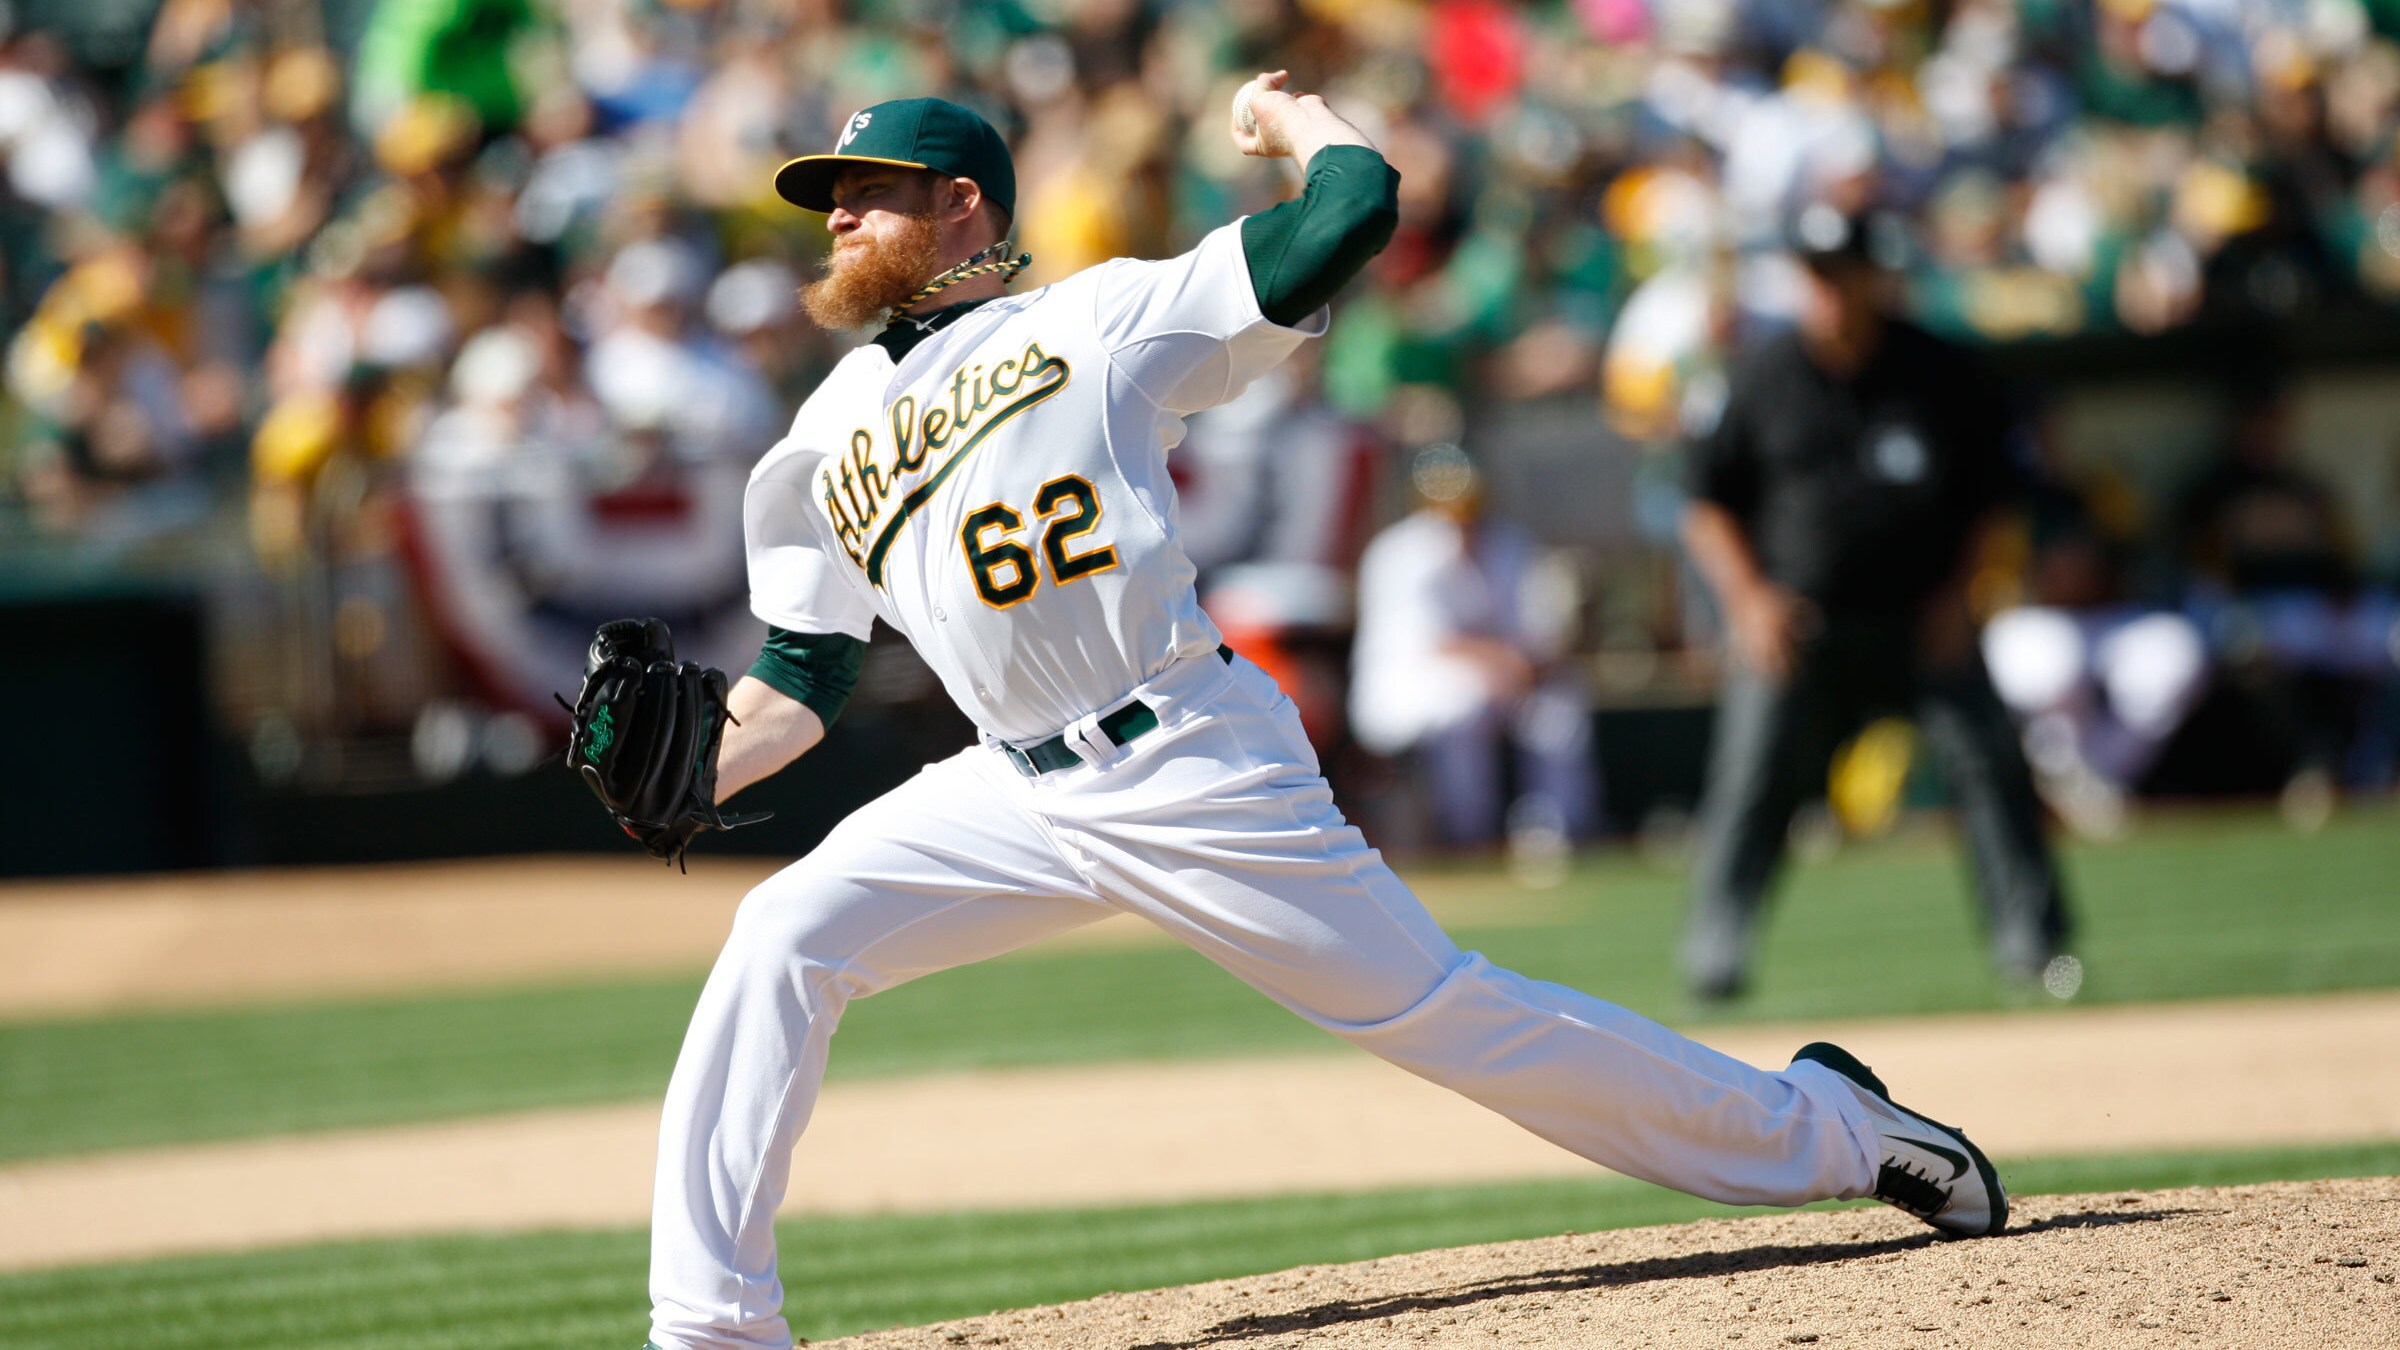 Throwing Four-Seamers with the Force: Talking Star Wars with Sean Doolittle of the Oakland A's